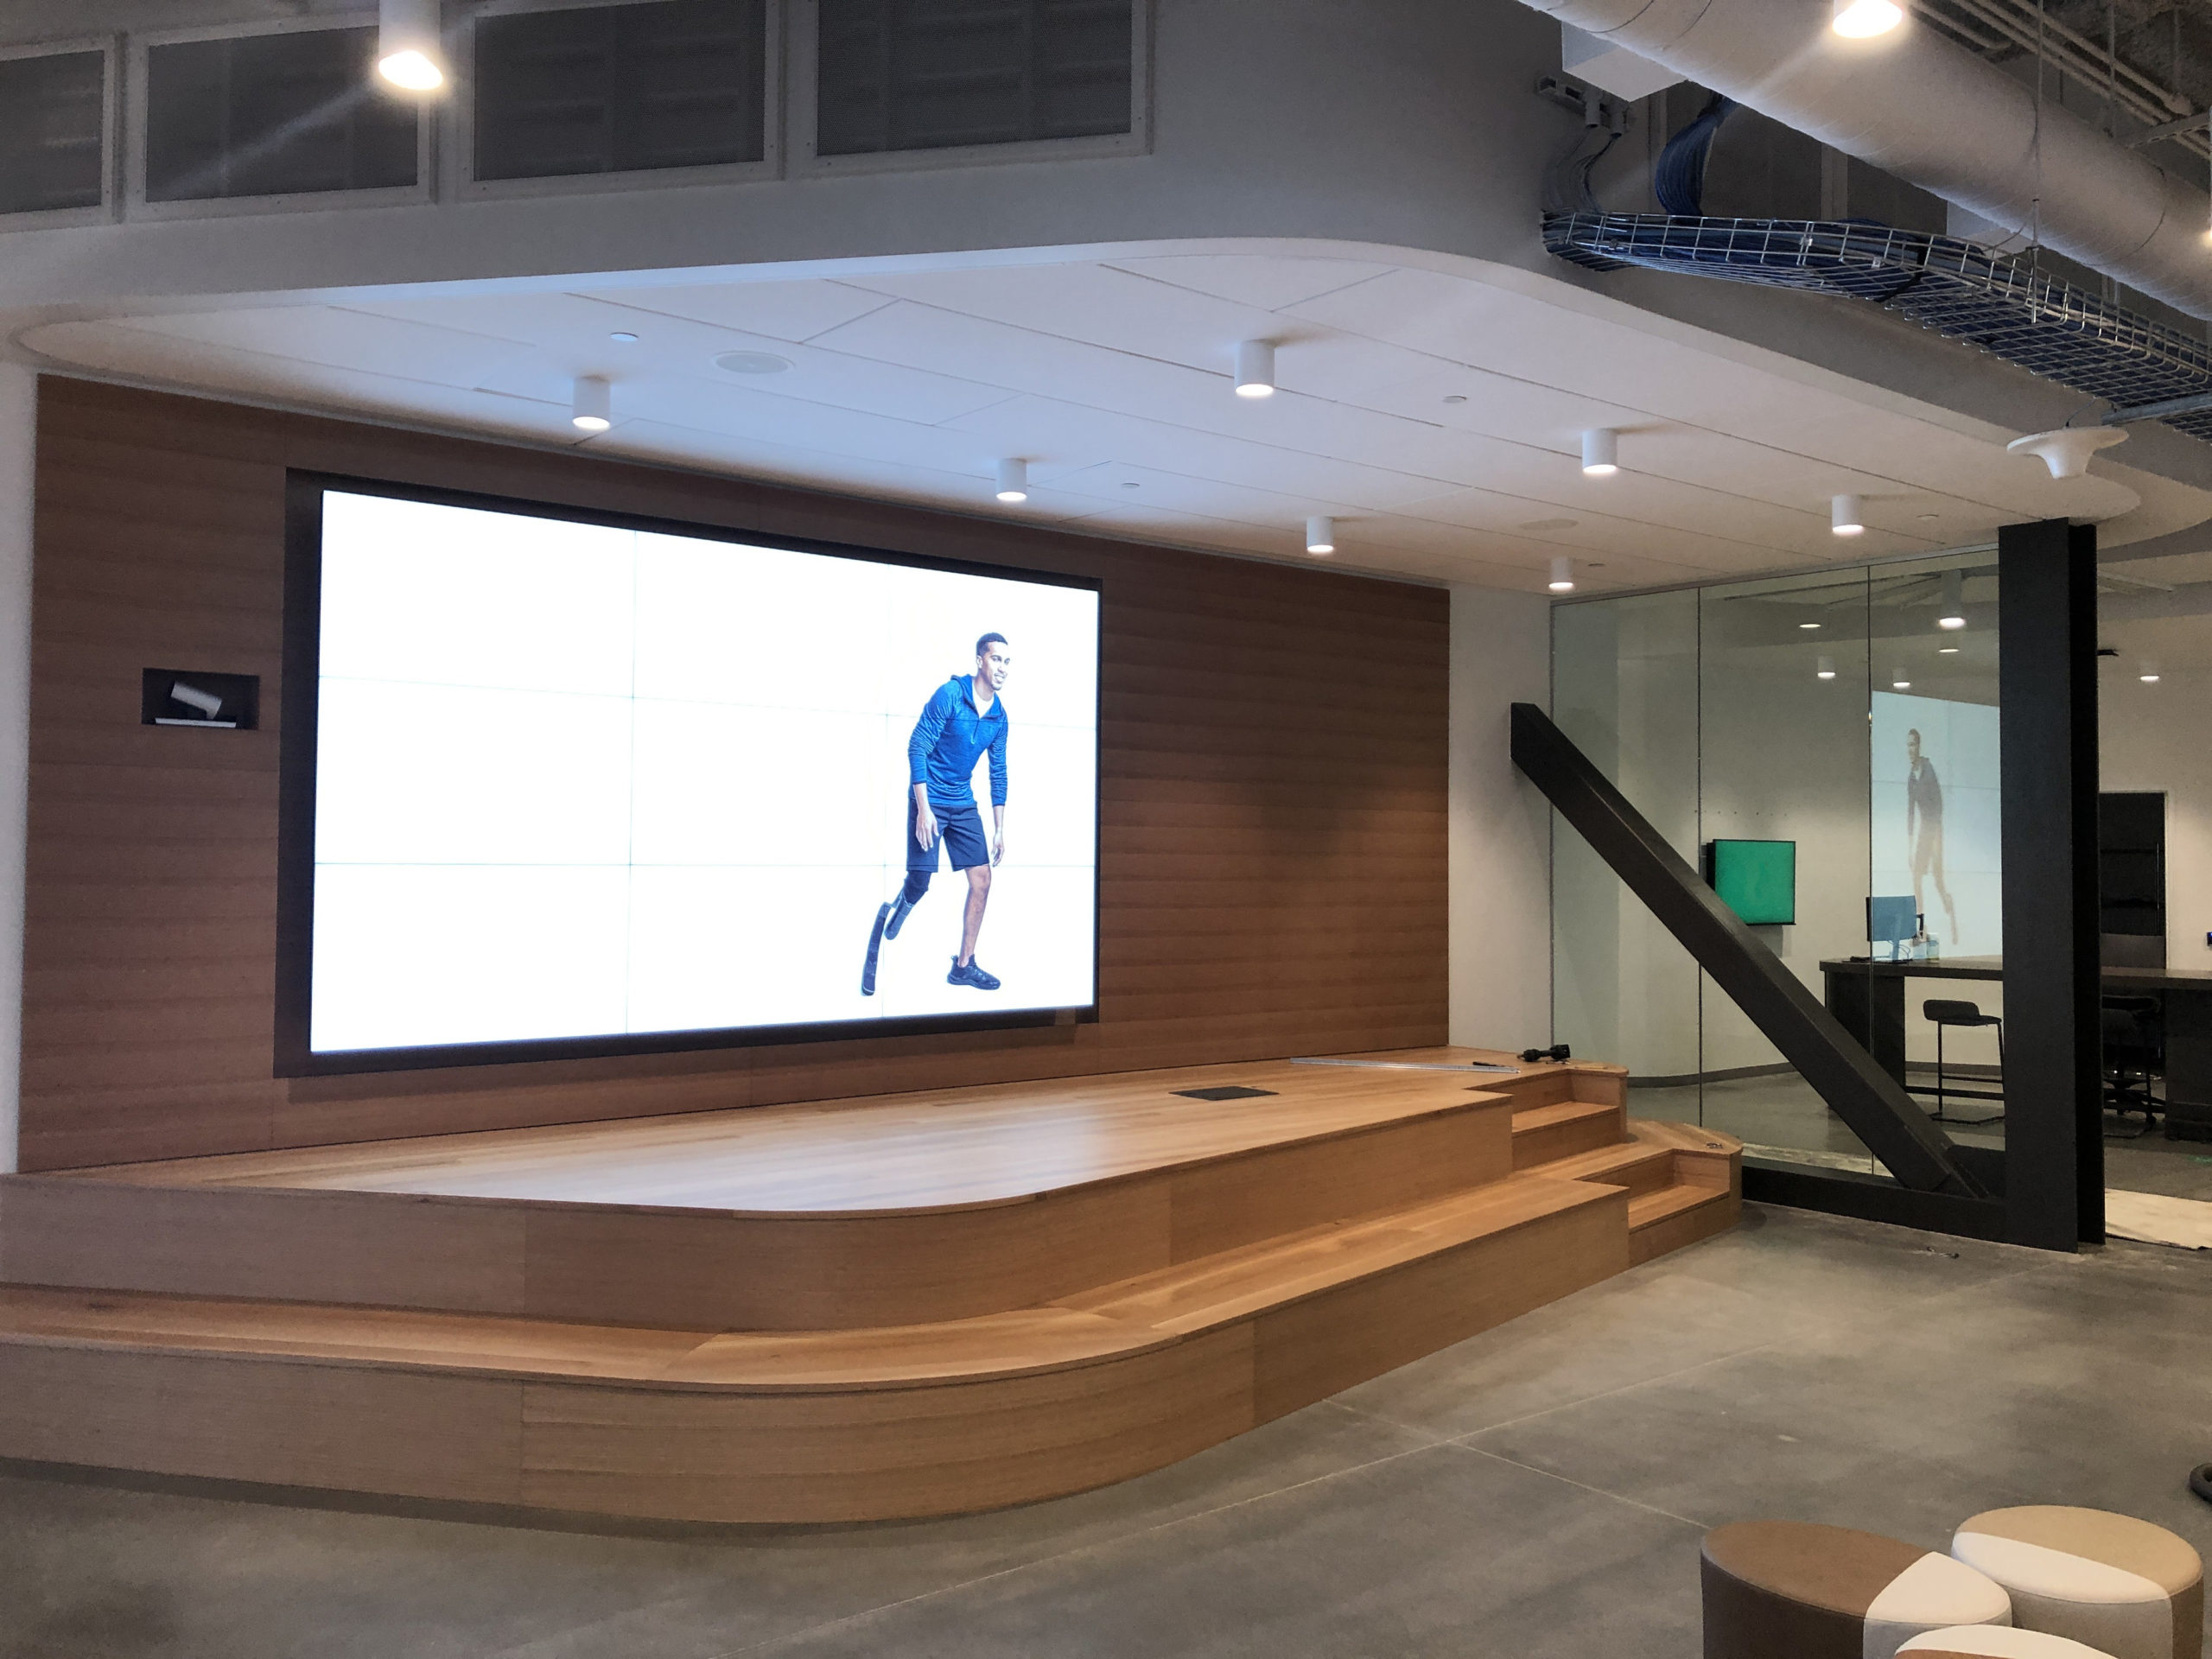 Video wall for brand's digital display